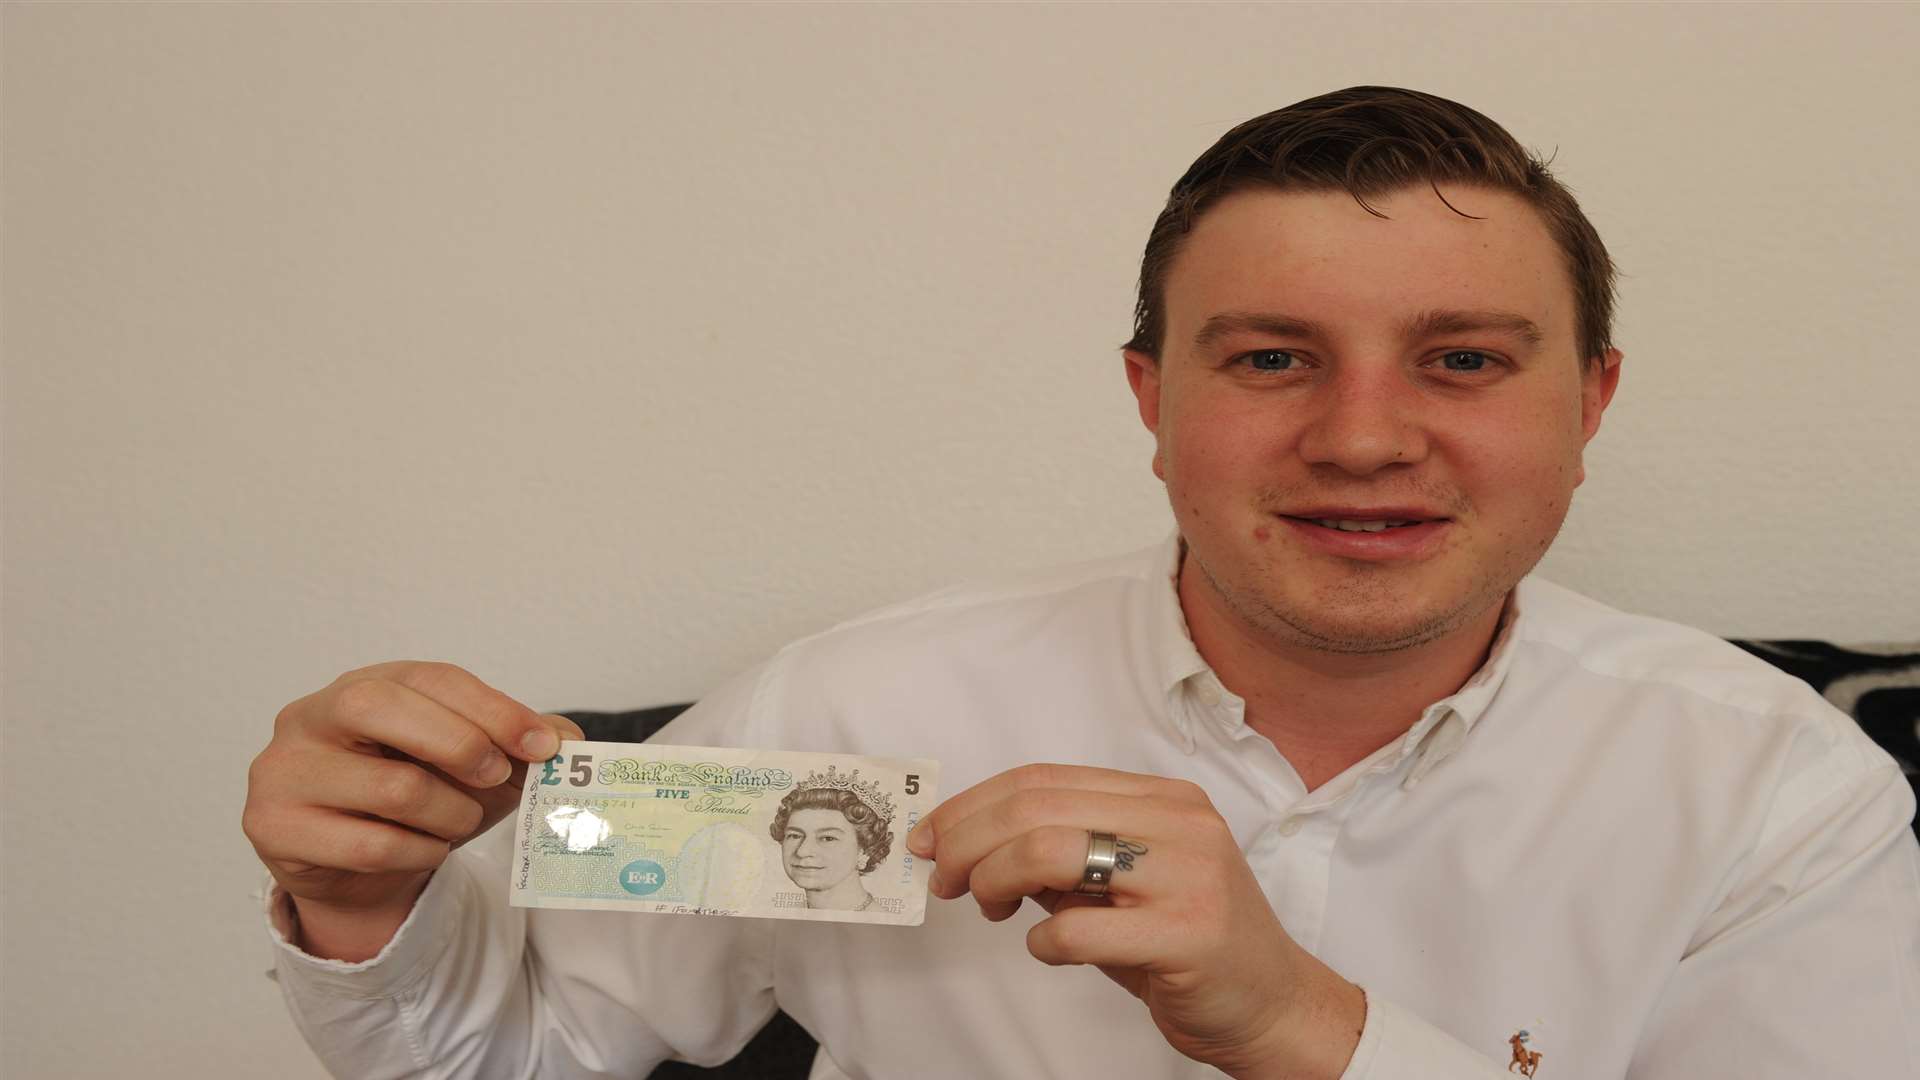 Luke Hughes with his traveling fiver. Picture: Steve Crispe